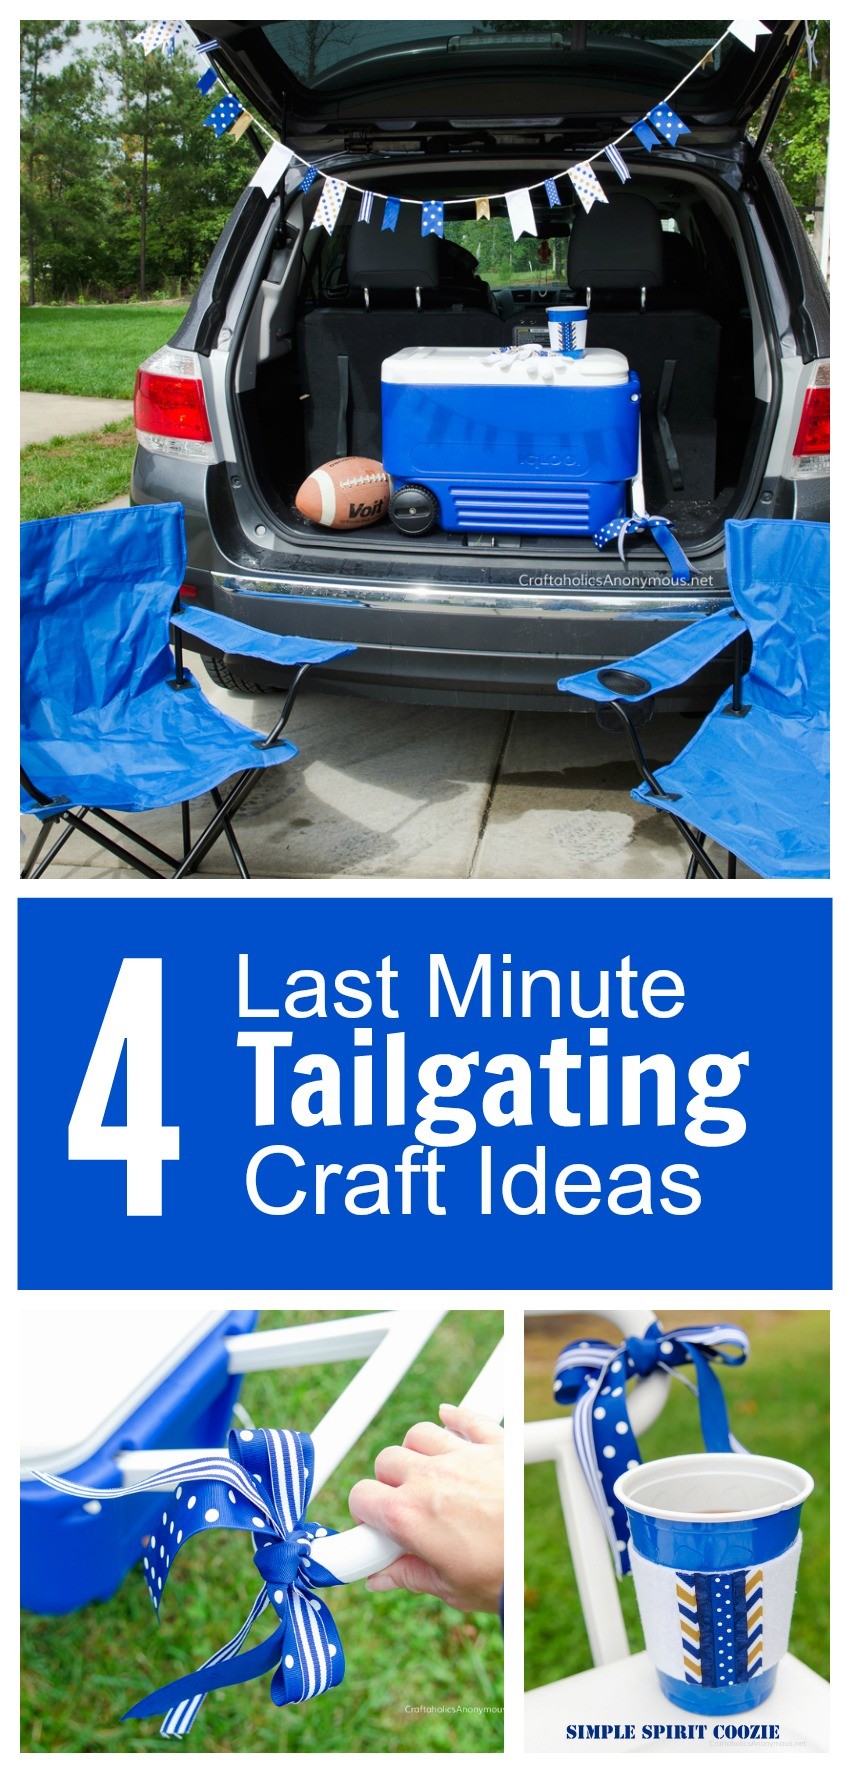 4 Last Minute Tailgating Craft Ideas you can do in minutes!